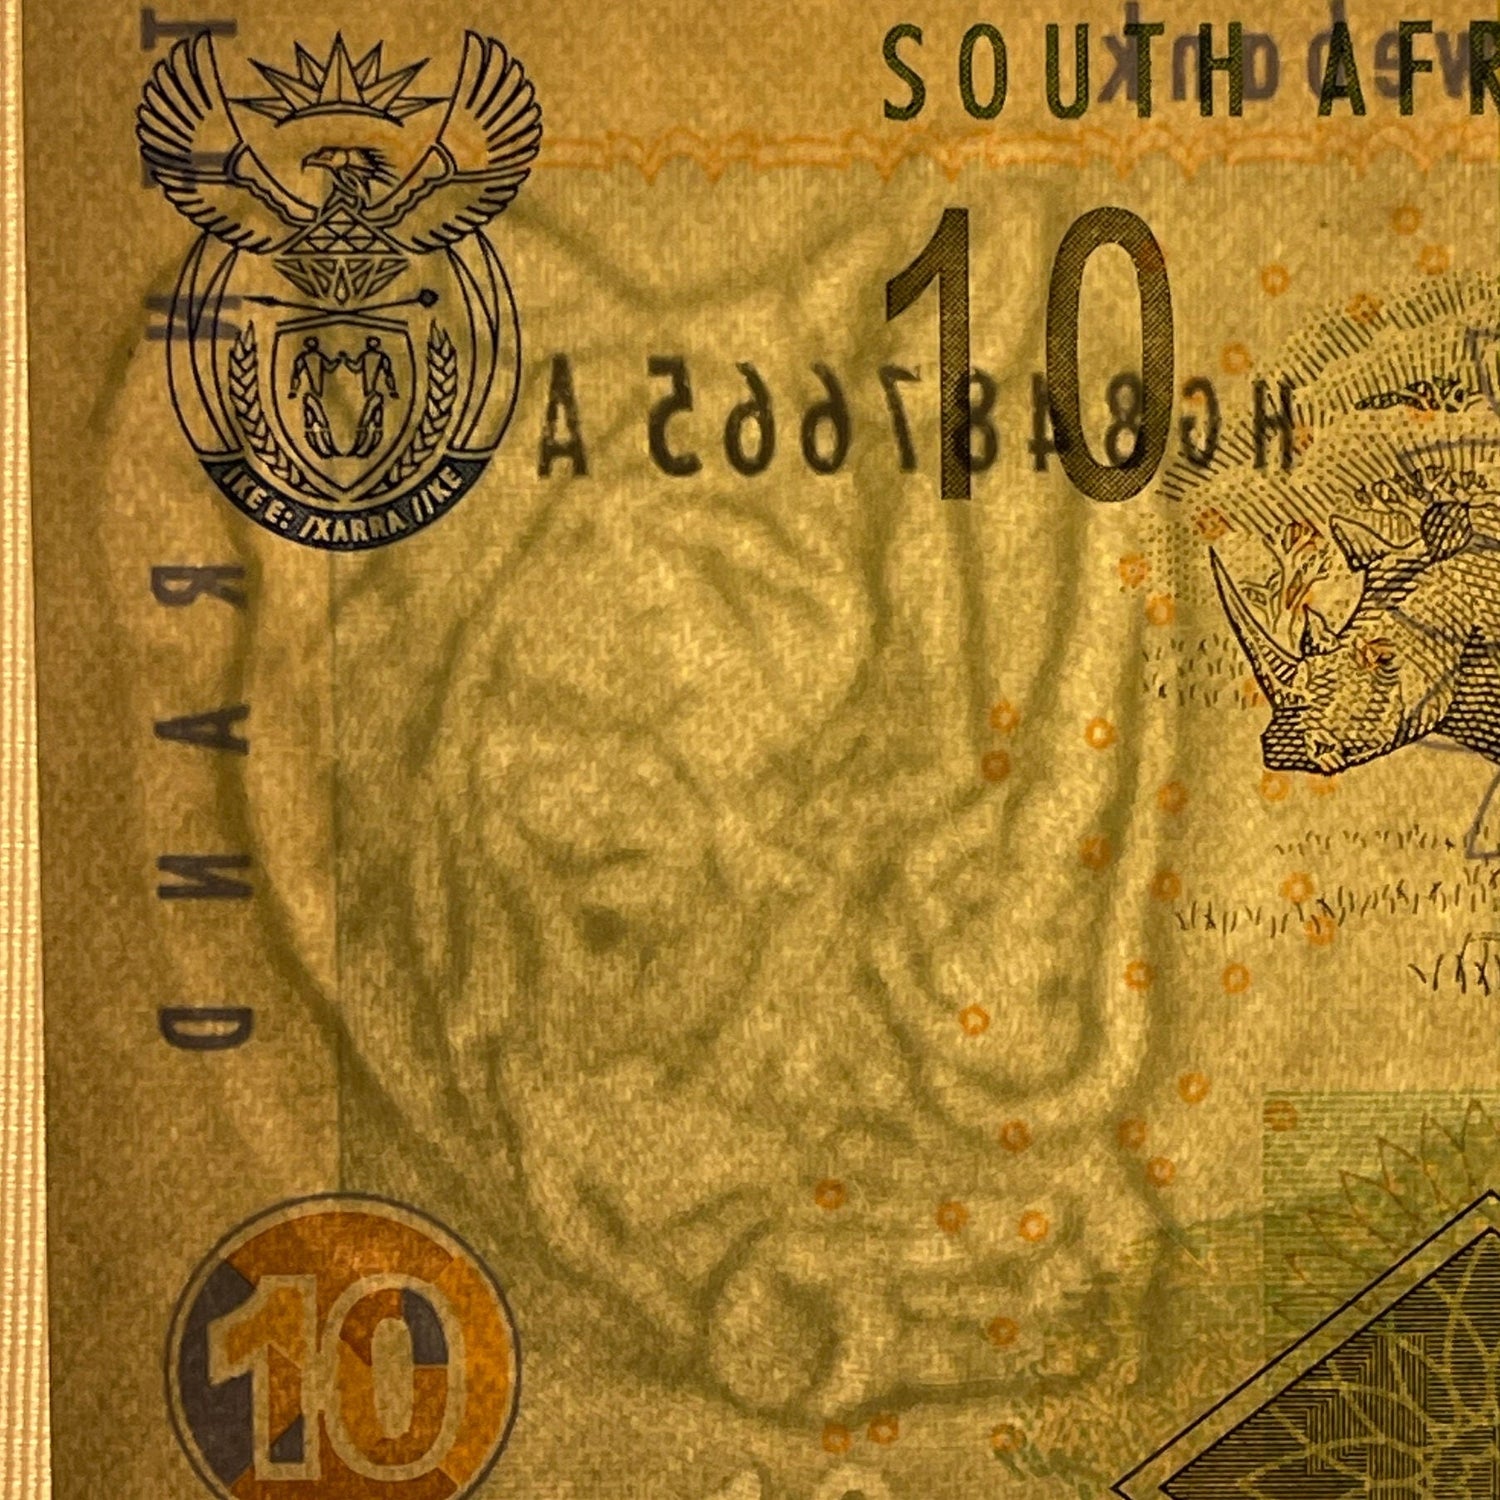 Southern White Rhino Family & Sheep Family 10 Rand South Africa Authentic Banknote Money for Jewelry and Collage